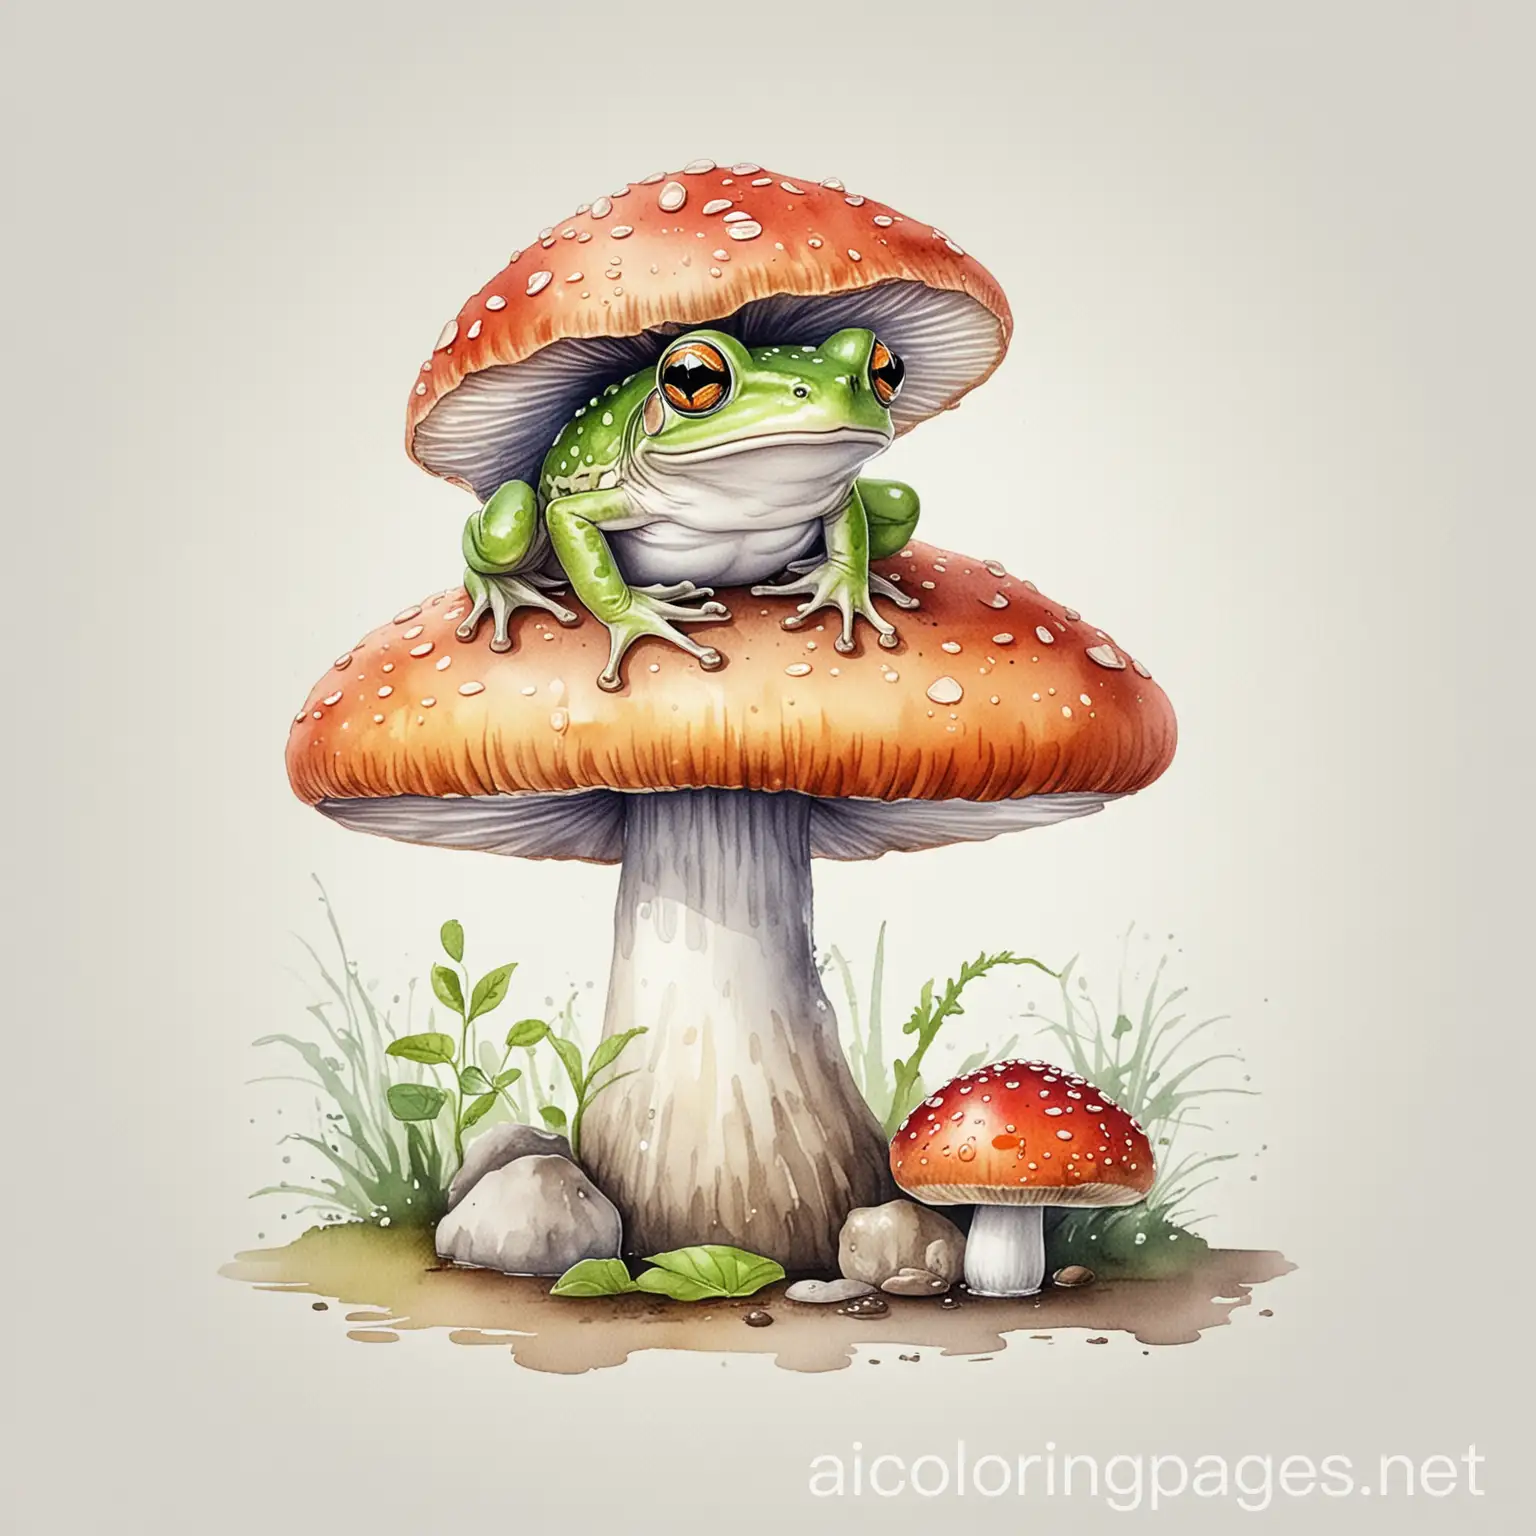 Adorable-Frog-on-Mushroom-Watercolor-Illustration-Coloring-Page